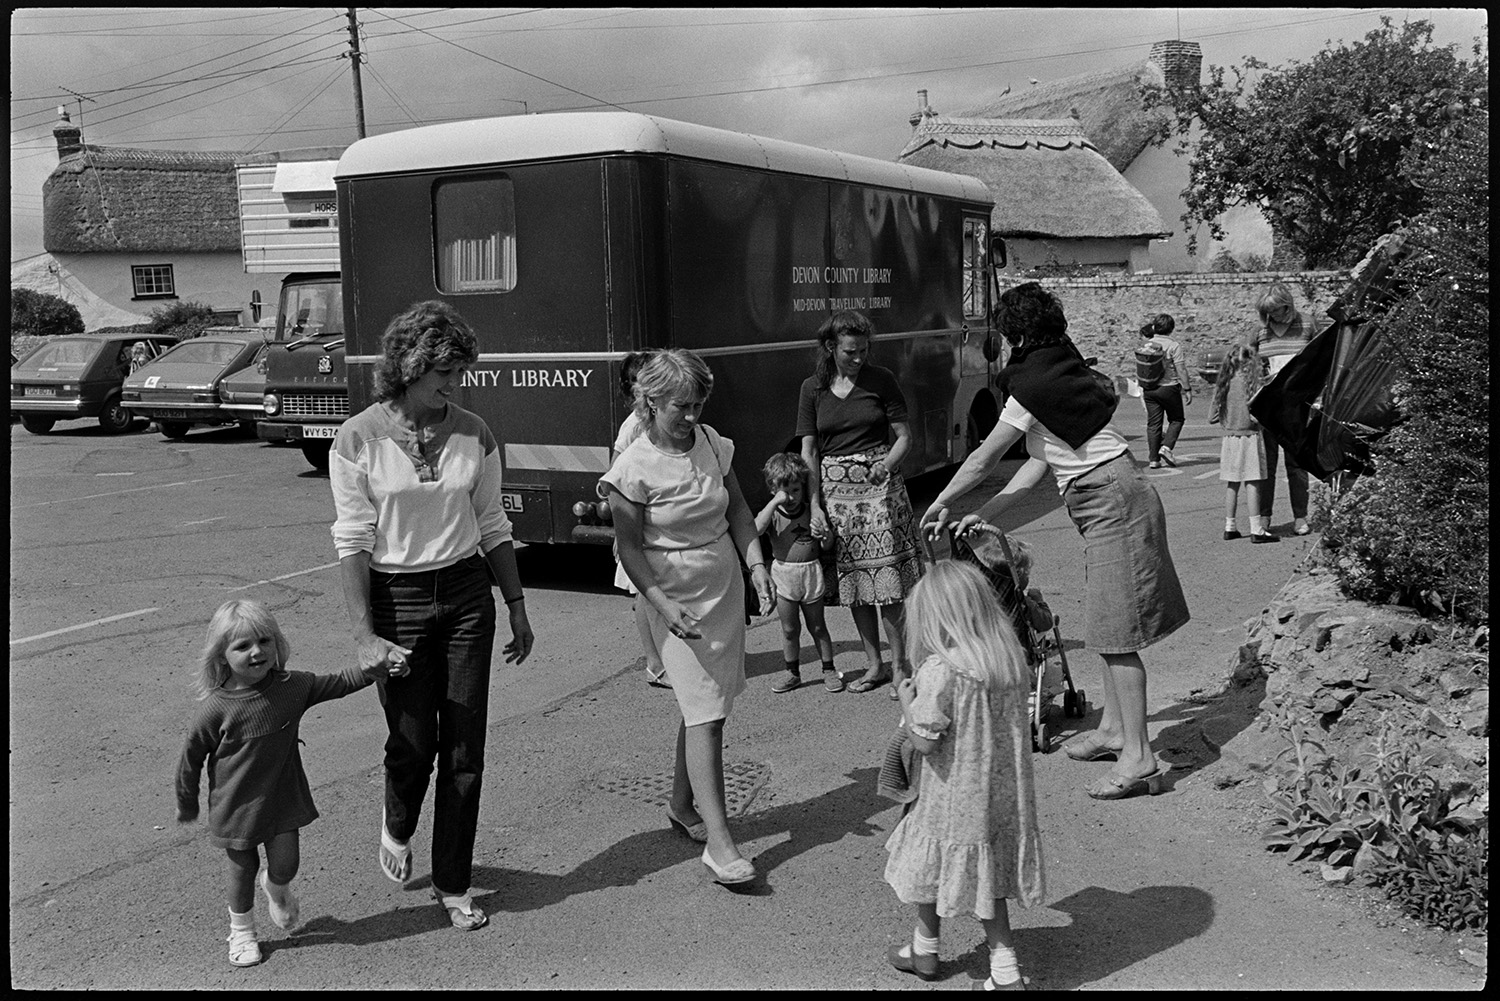 Library van parked in village, women and children after school. 
[Woman and children after school in a street in Dolton. They are stood by a library van. Thatched cottages and parked cars can be seen in the background.]